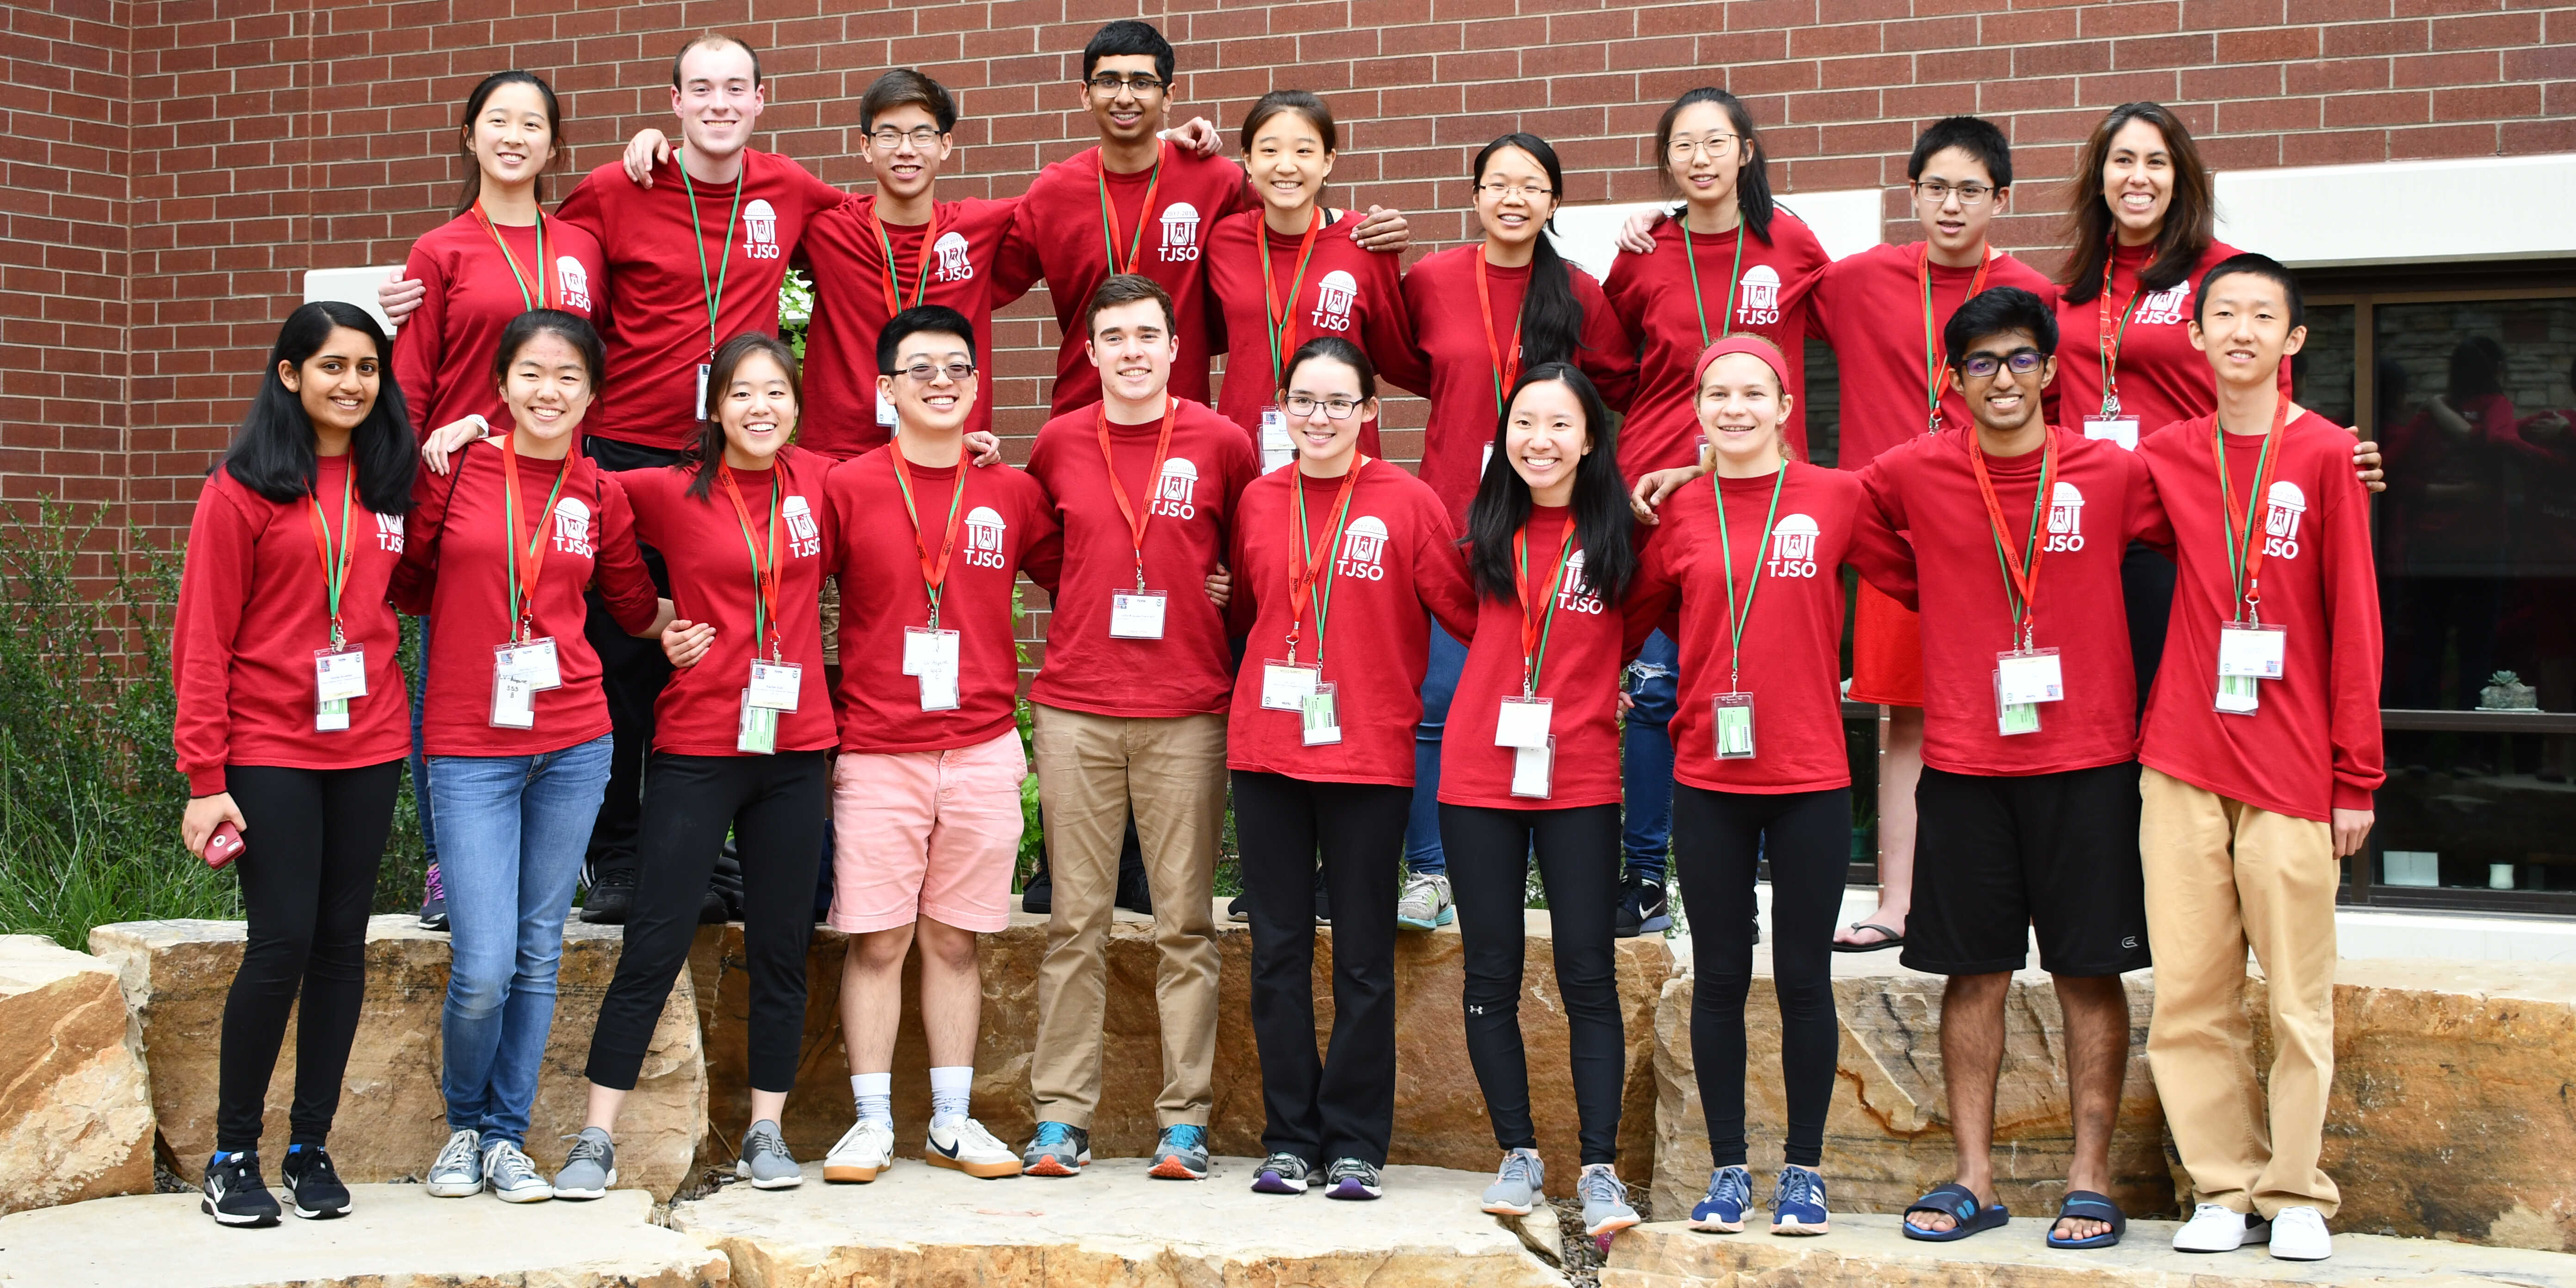 Our 2018 states team at the Science Olympiad National Tournament